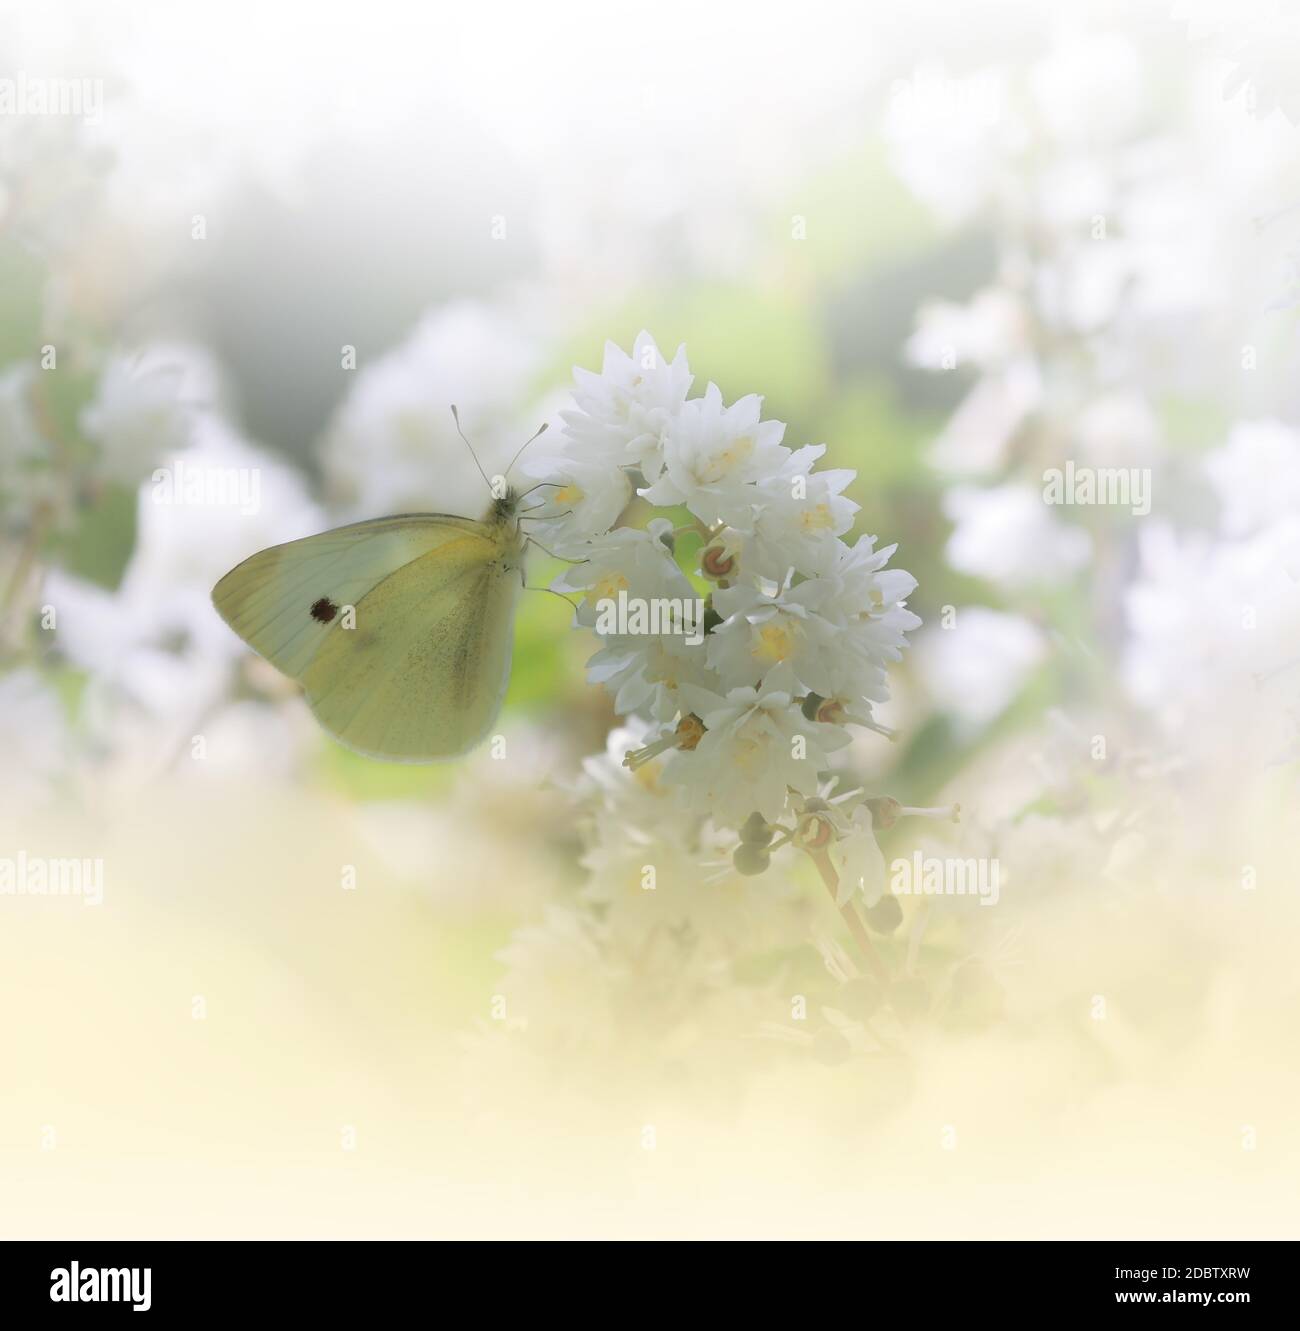 Beautiful Golden Nature Background.Floral Art Design.Macro Photography.Abstract Pastel Landscape with Copy Space.Butterfly and Field.Summer Butterfly on a White Flower.Creative Artistic Wallpaper.Tranquil Scene.Yellow Color.Jasmine Flowers. Stock Photo